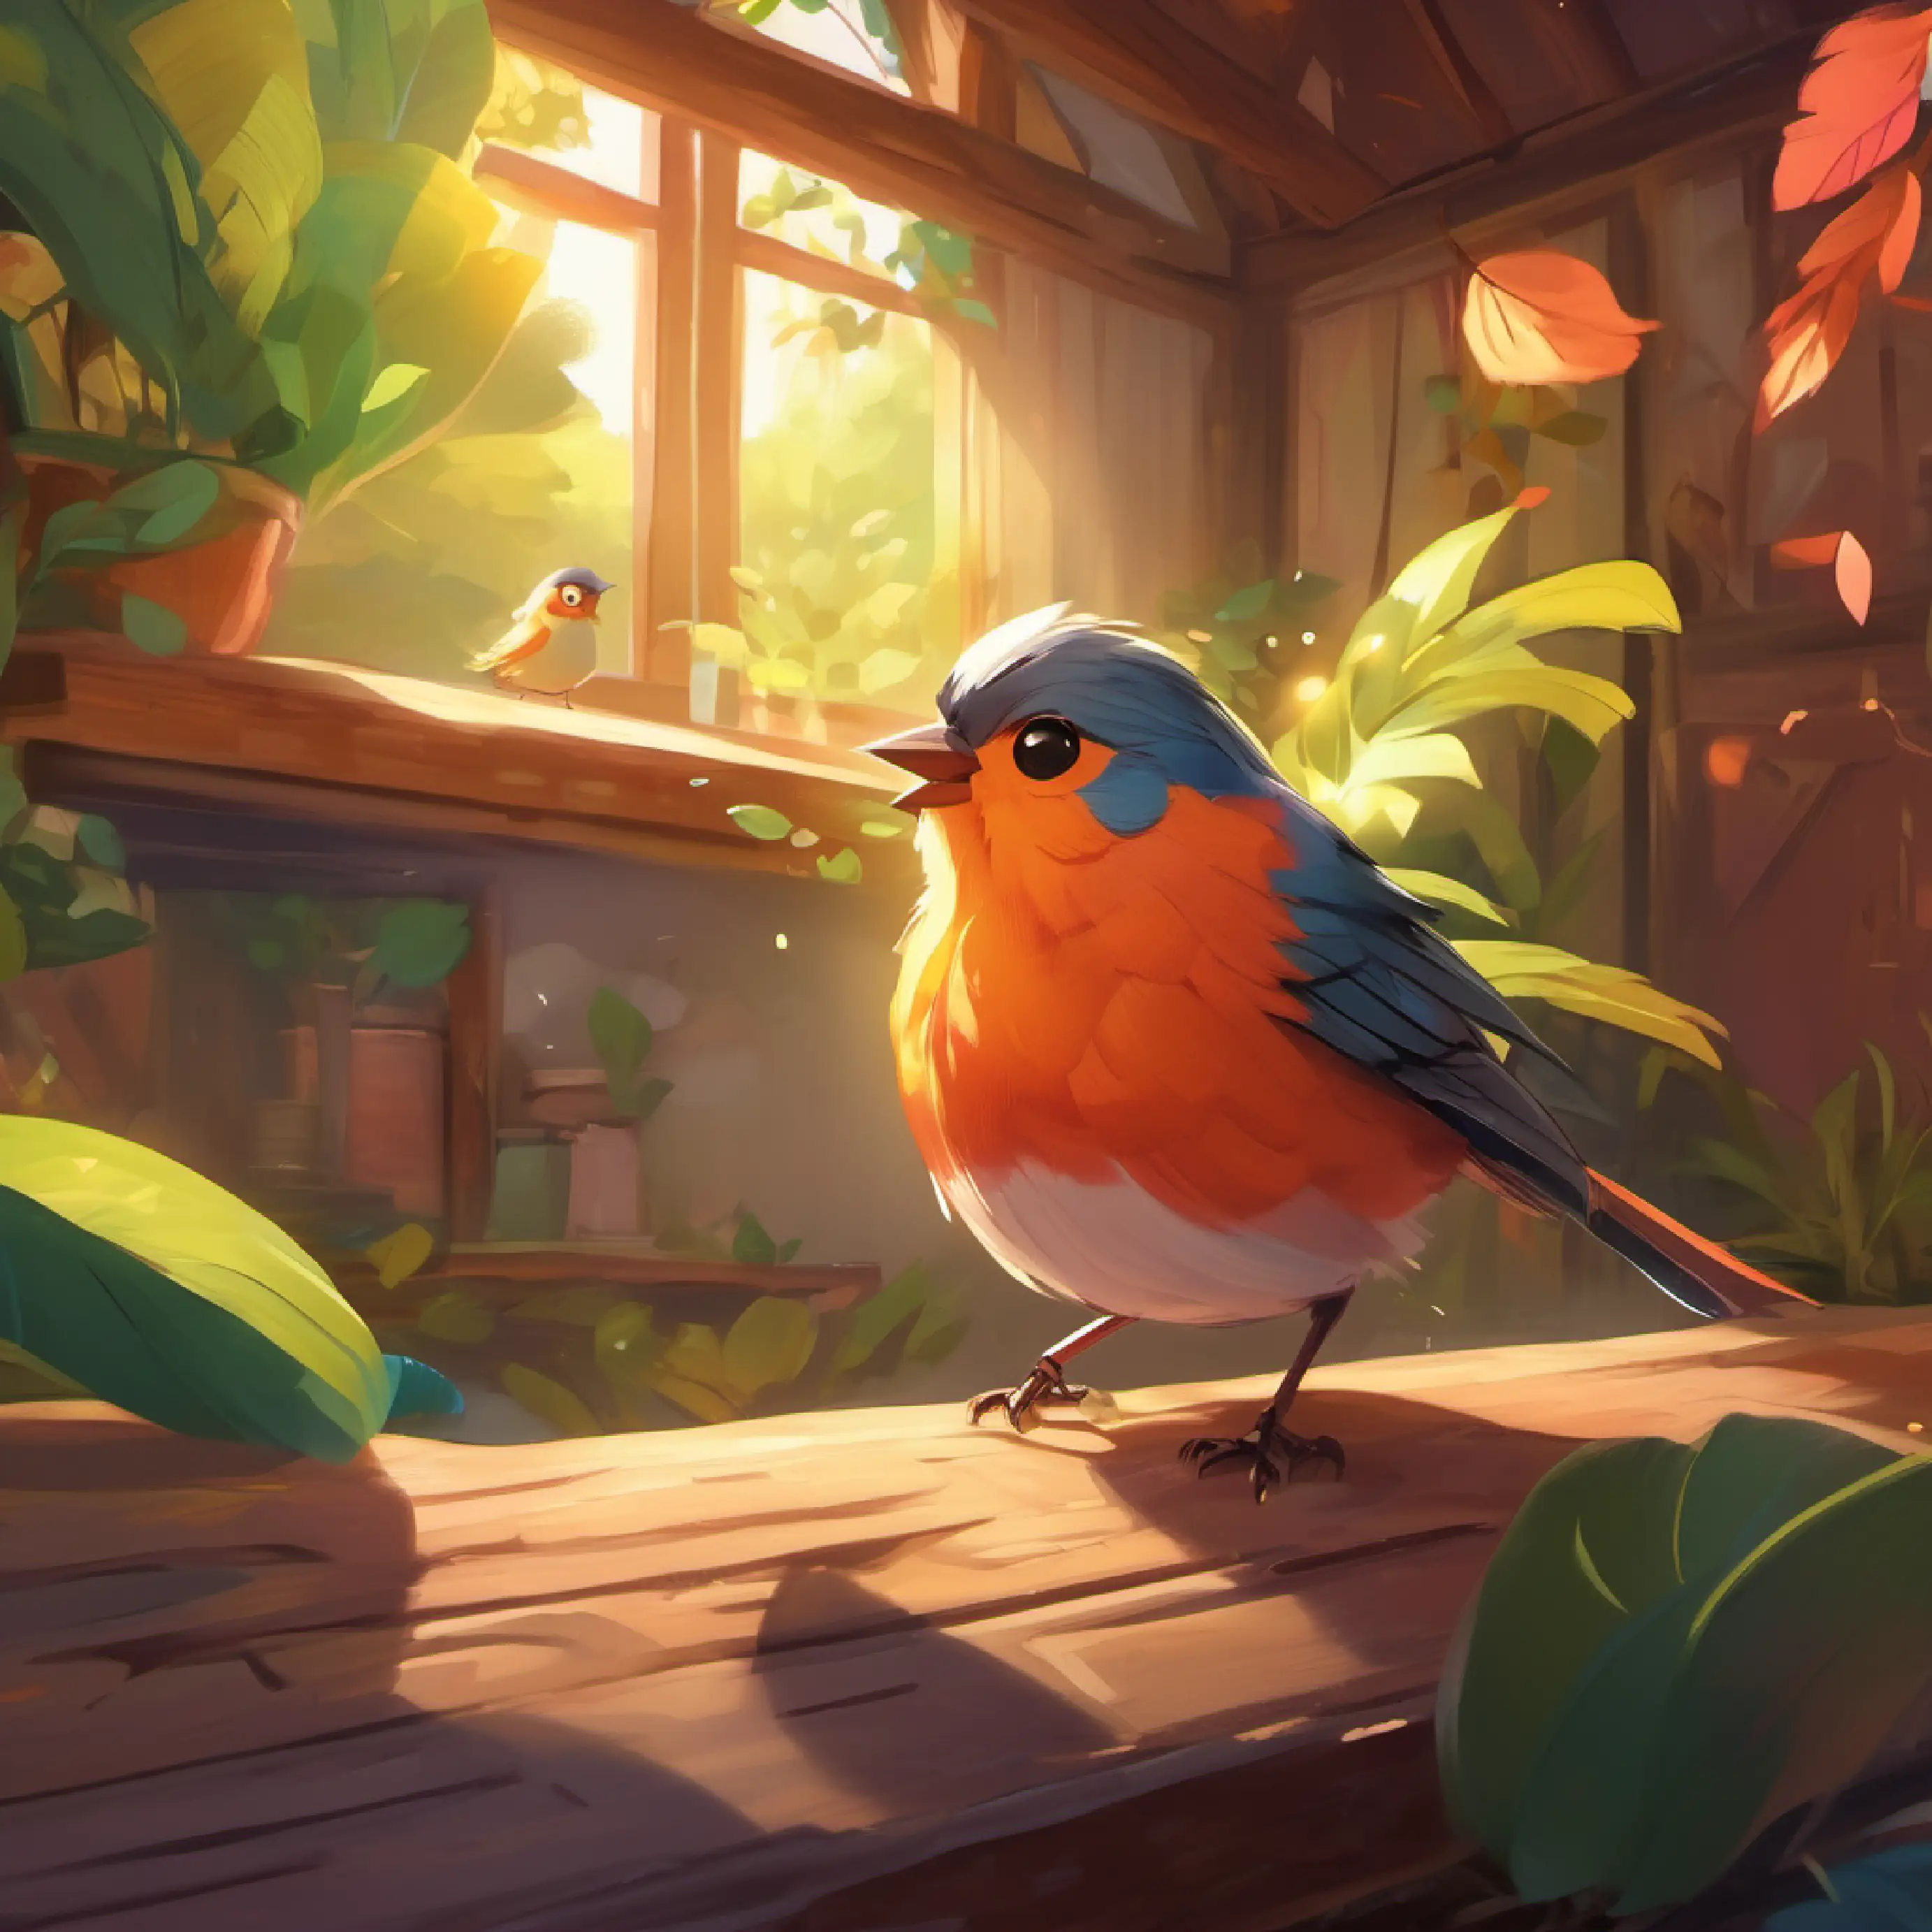 Introduction to A small bird with bright feathers and a big heart, our protagonist, and her home.